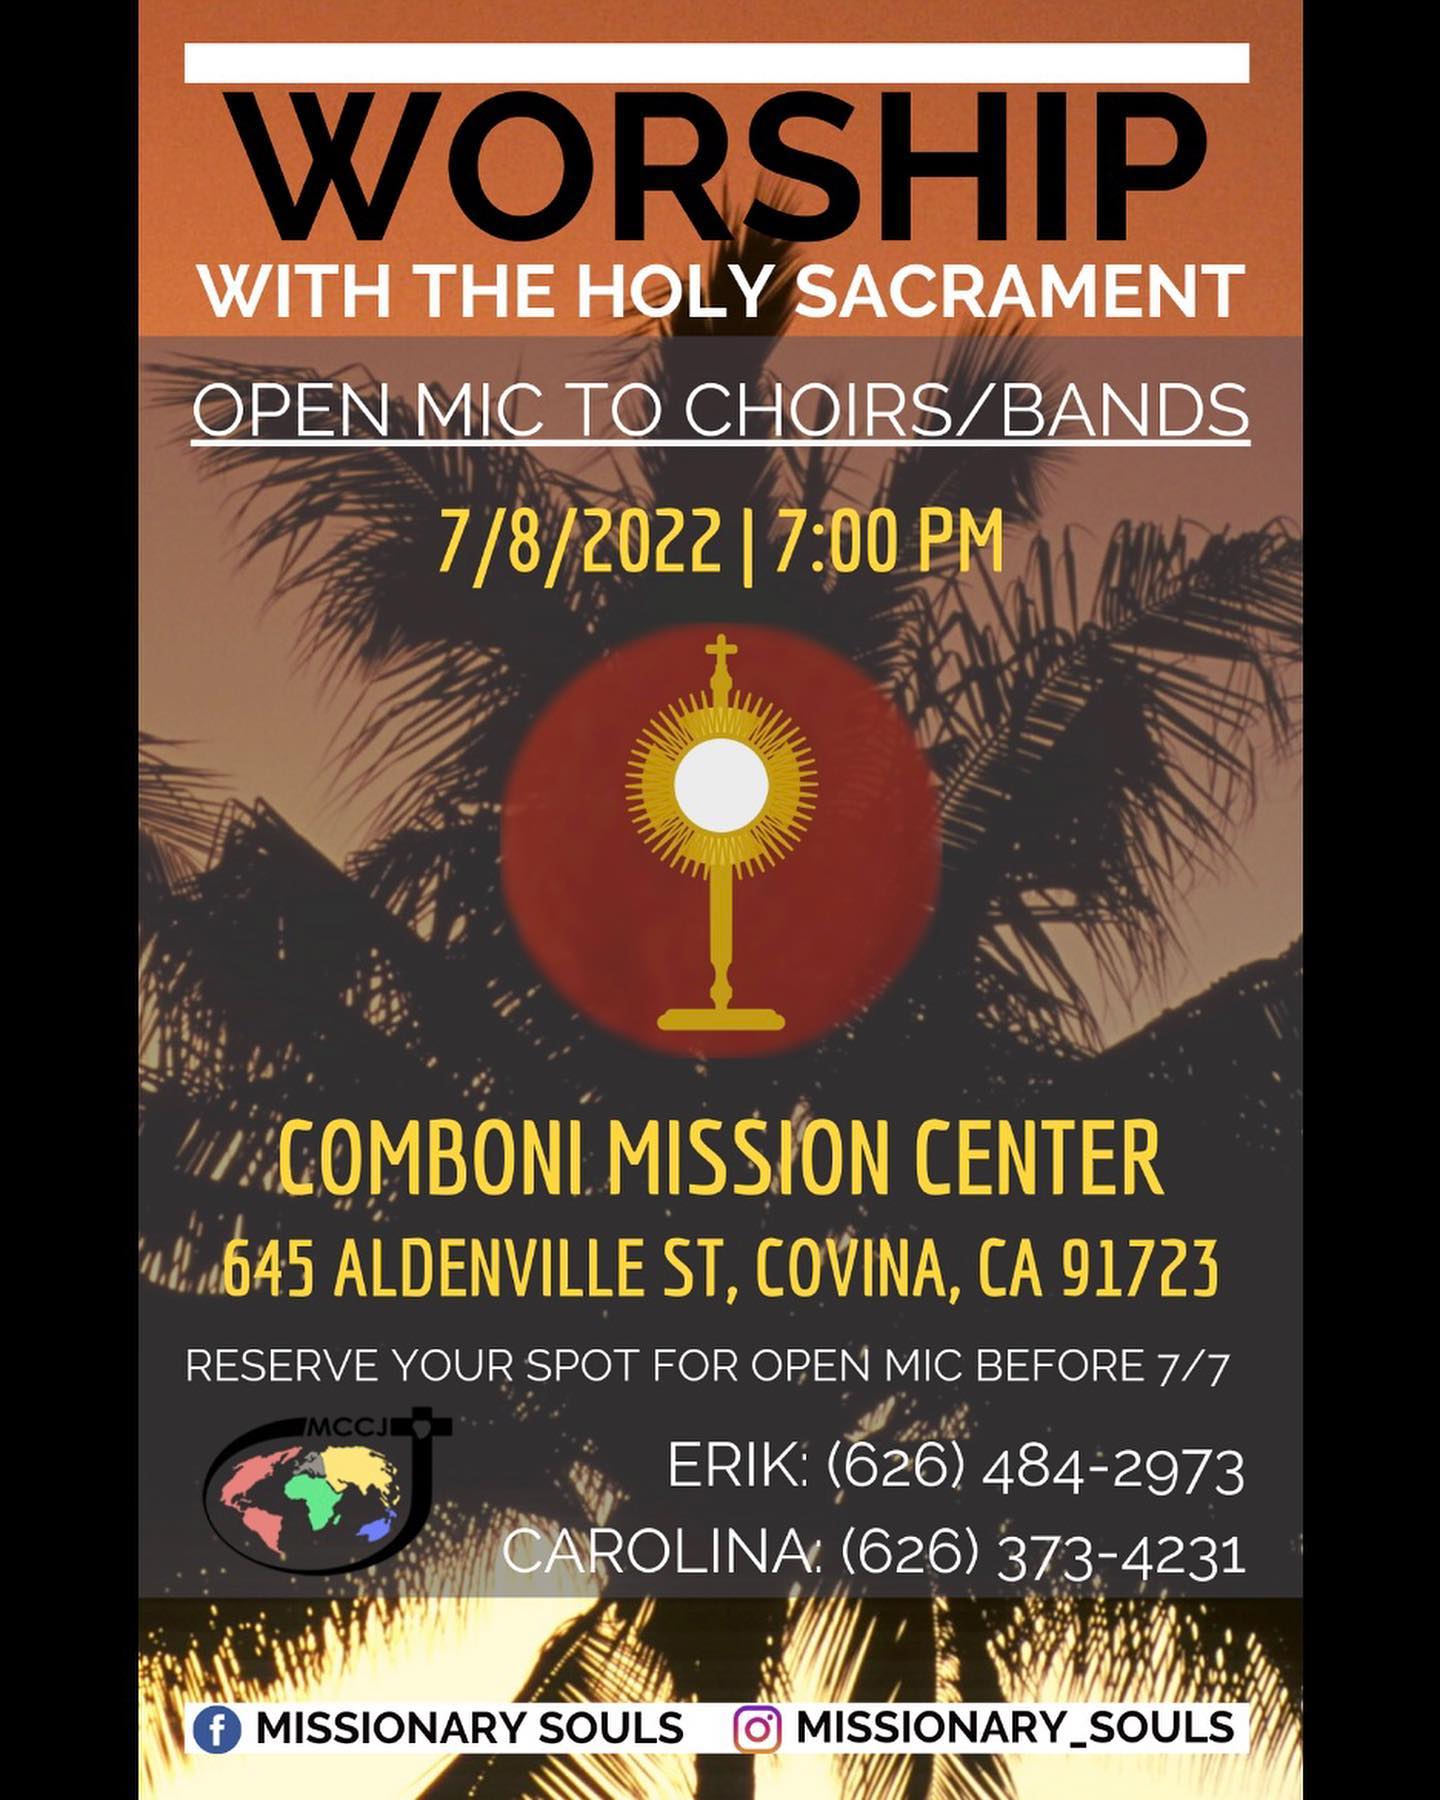 We will have a very special event!! If you want to sing to the Blessed Sacrament during the Holy Hour contact us! Everything will be Friday is 7/8 at 7:00 PM